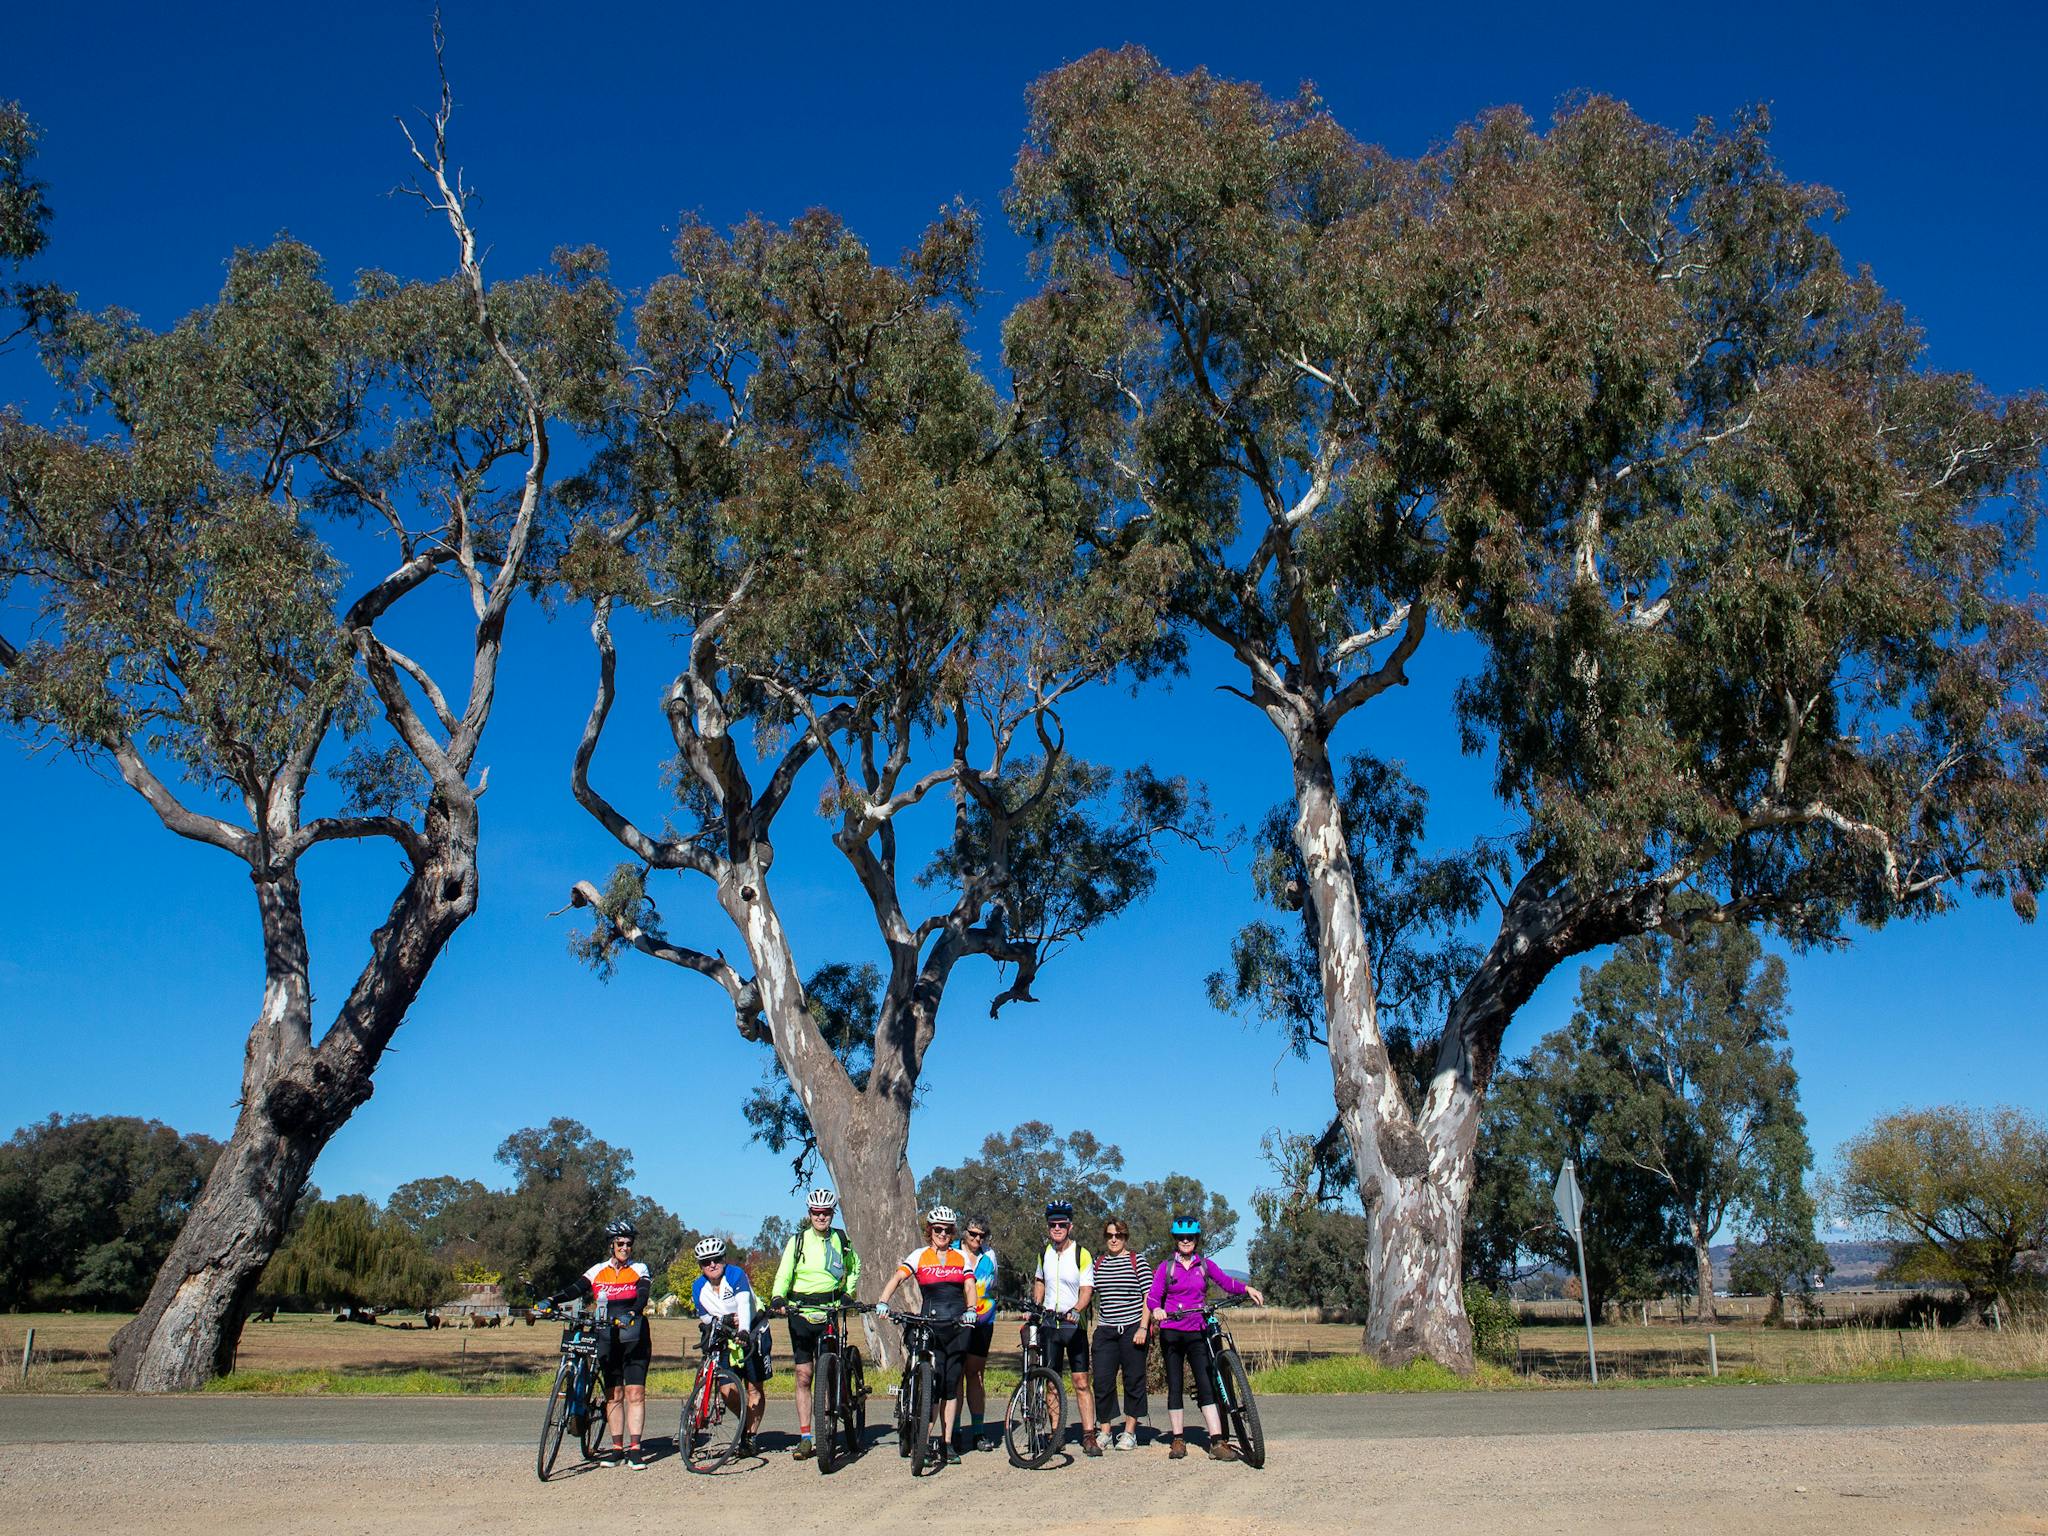 Cyclists standing in front of the trees  which tower over them. Brilliant blue sky